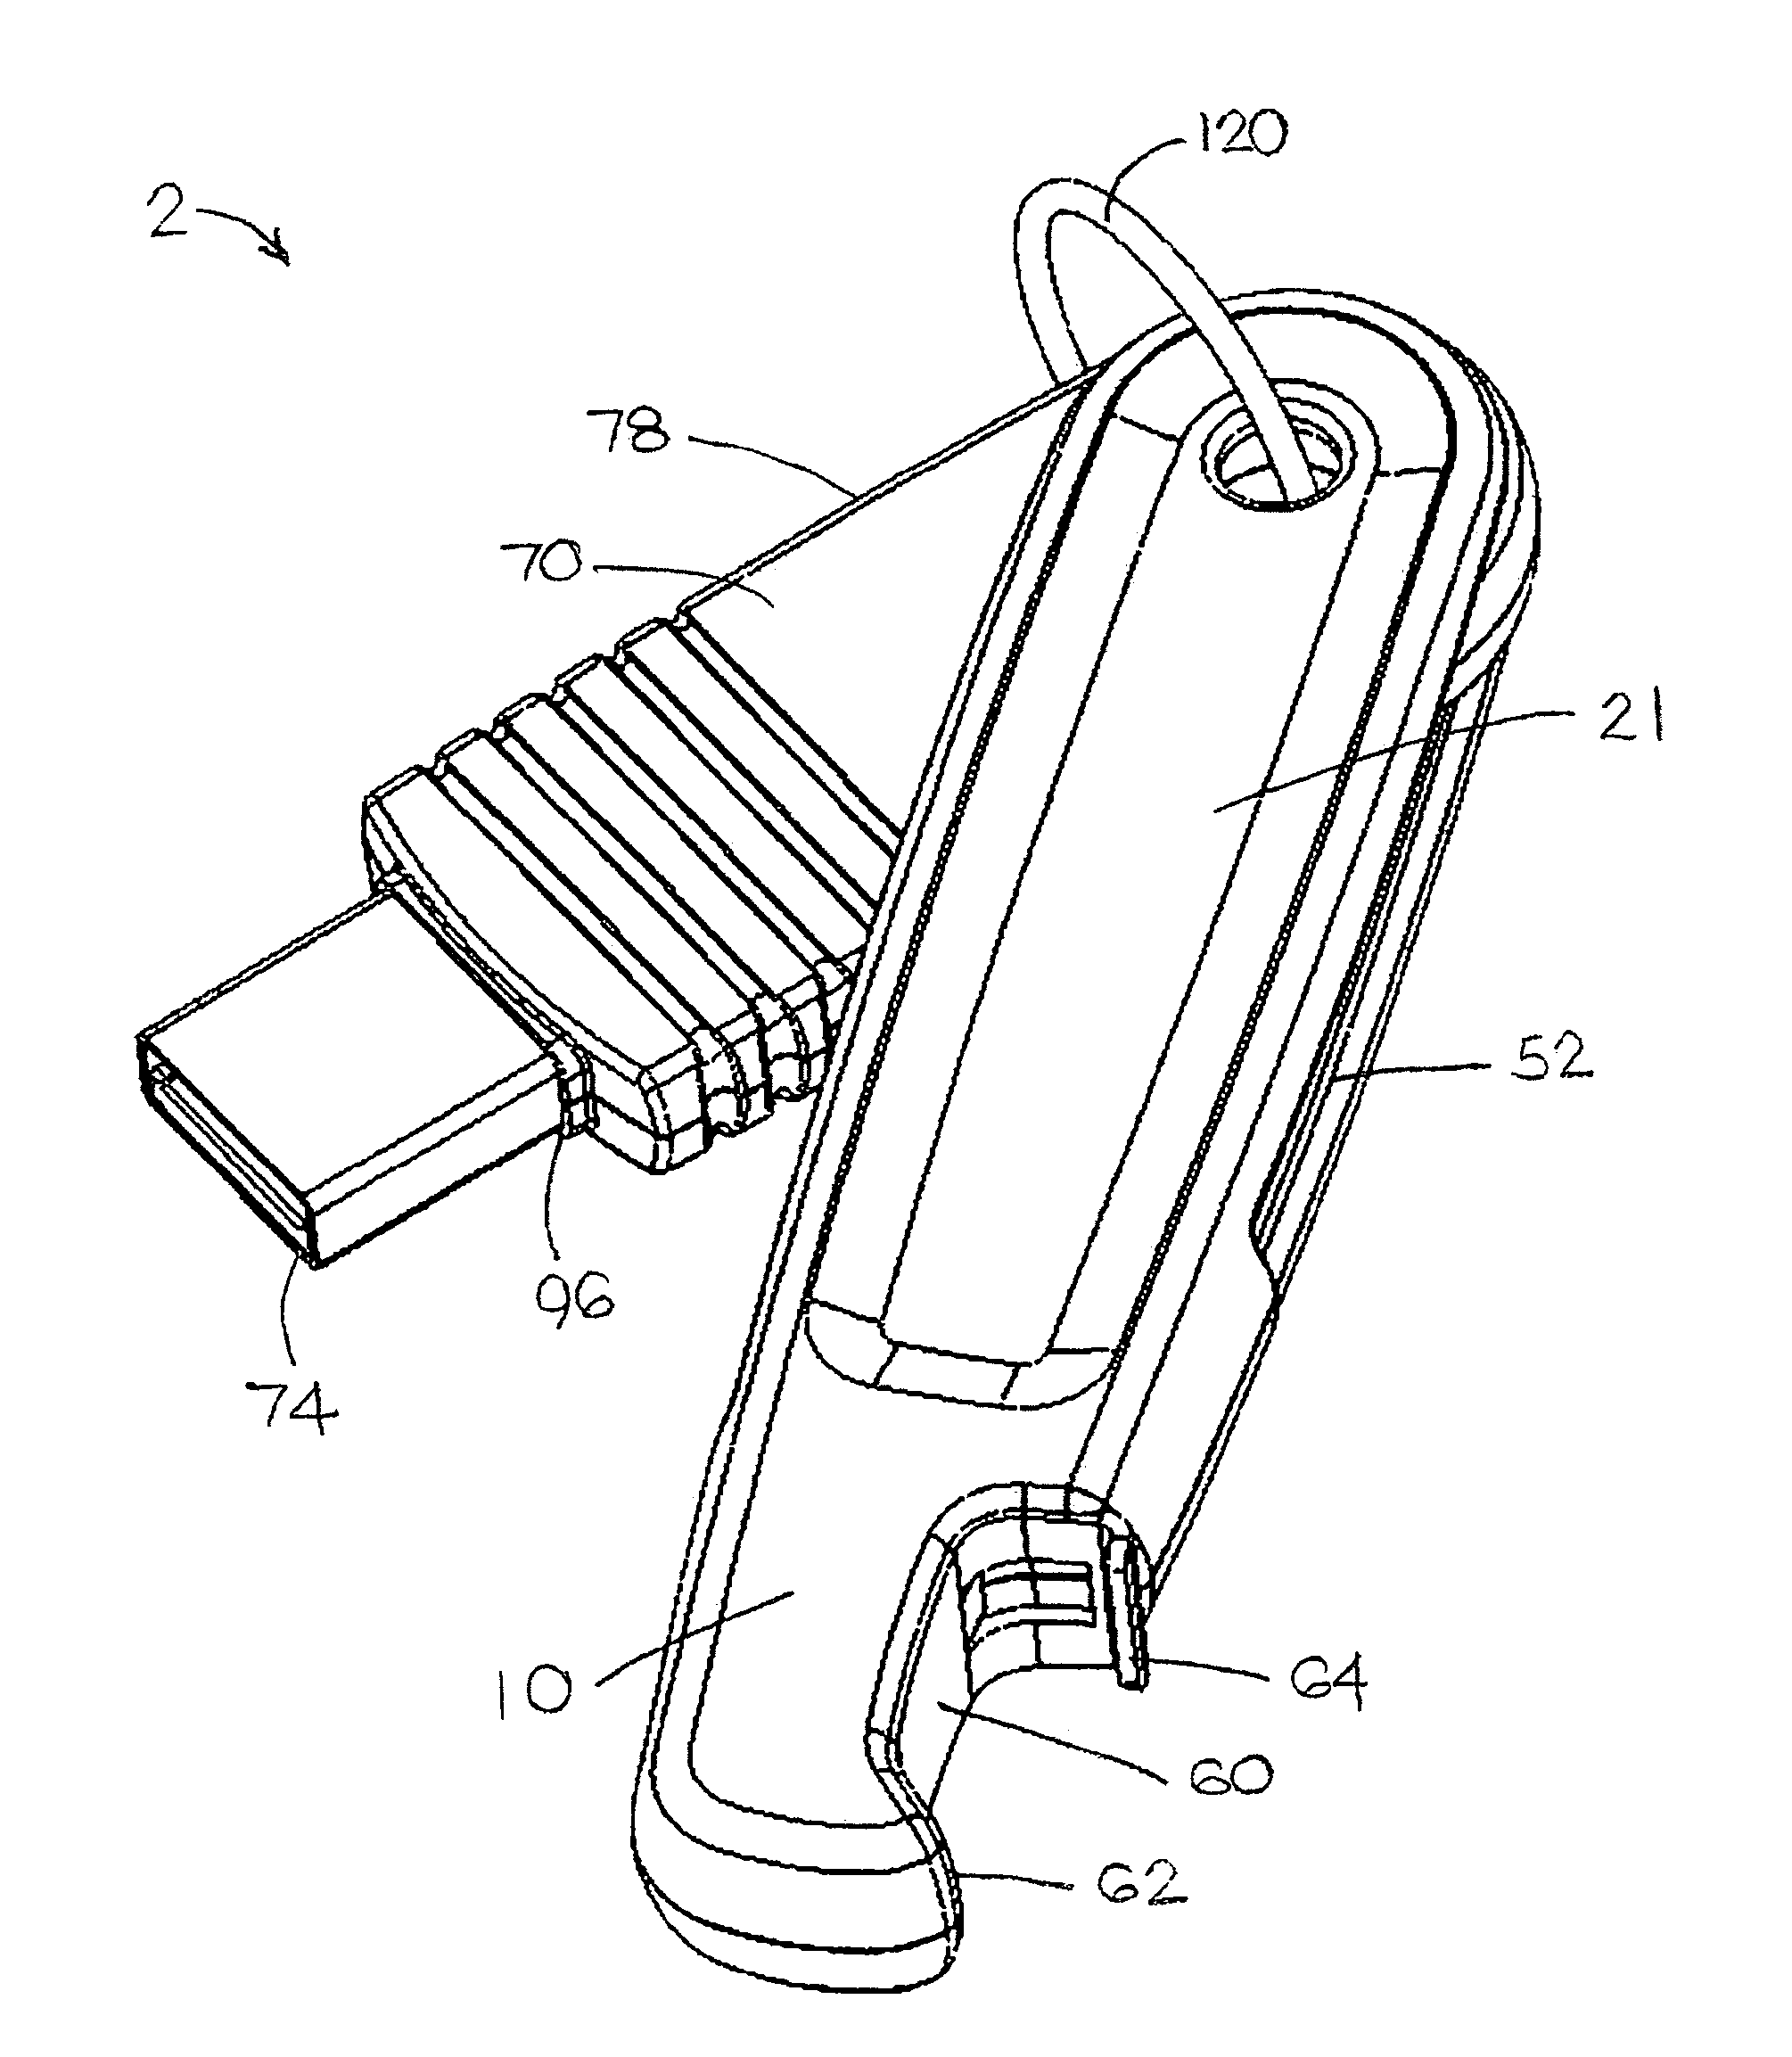 Bottle opening and portable data storage apparatus